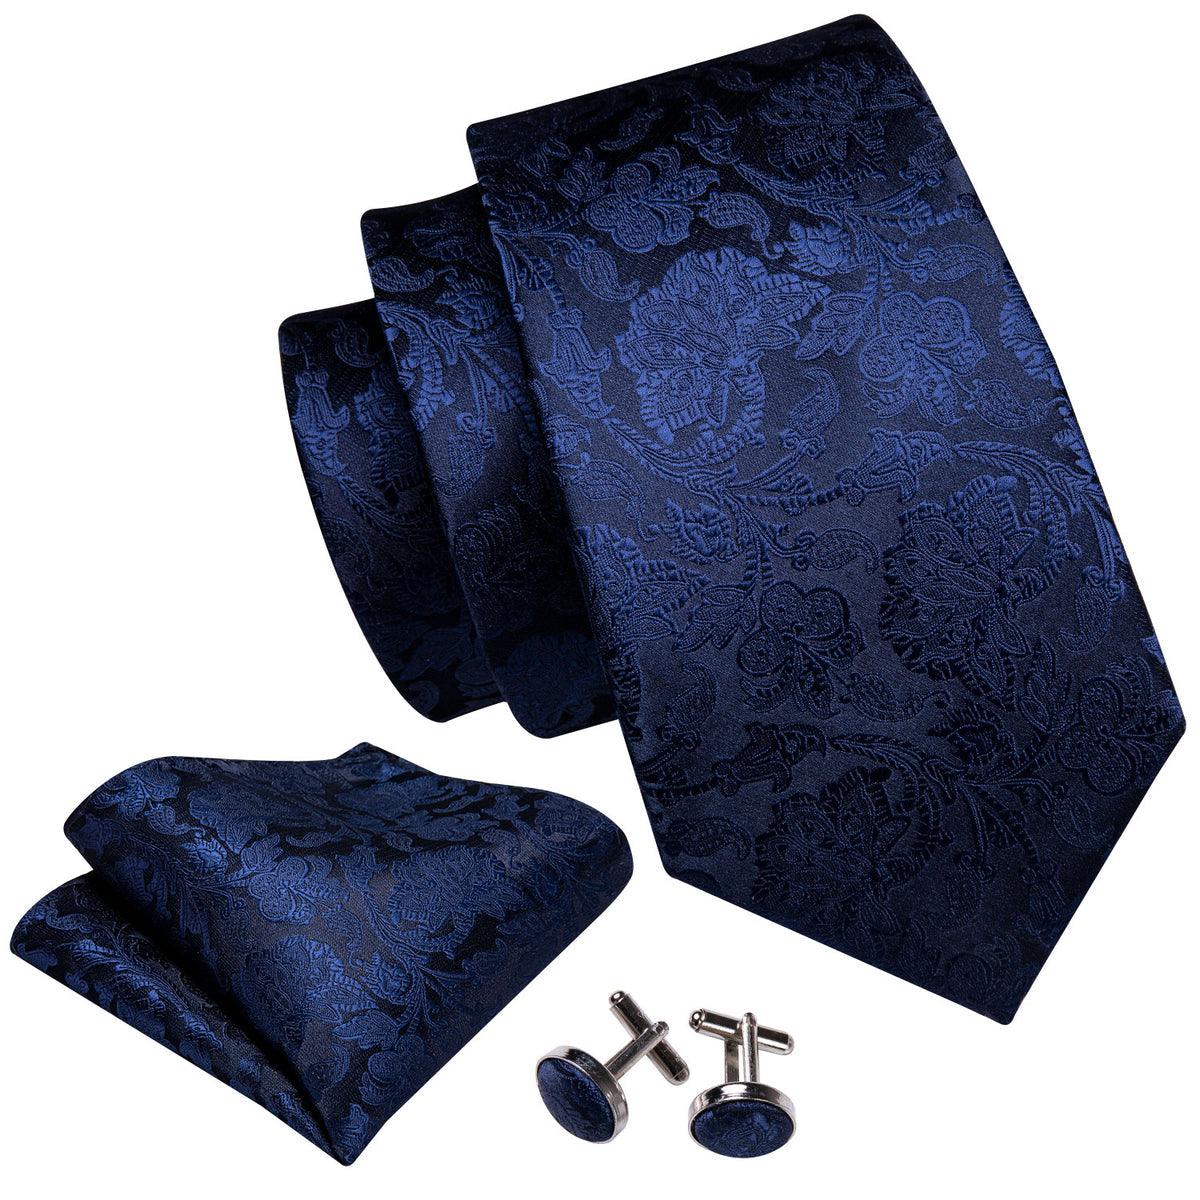 Extra Long Navy Blue Floral Tie Pocket Square Cufflink Set - STYLETIE